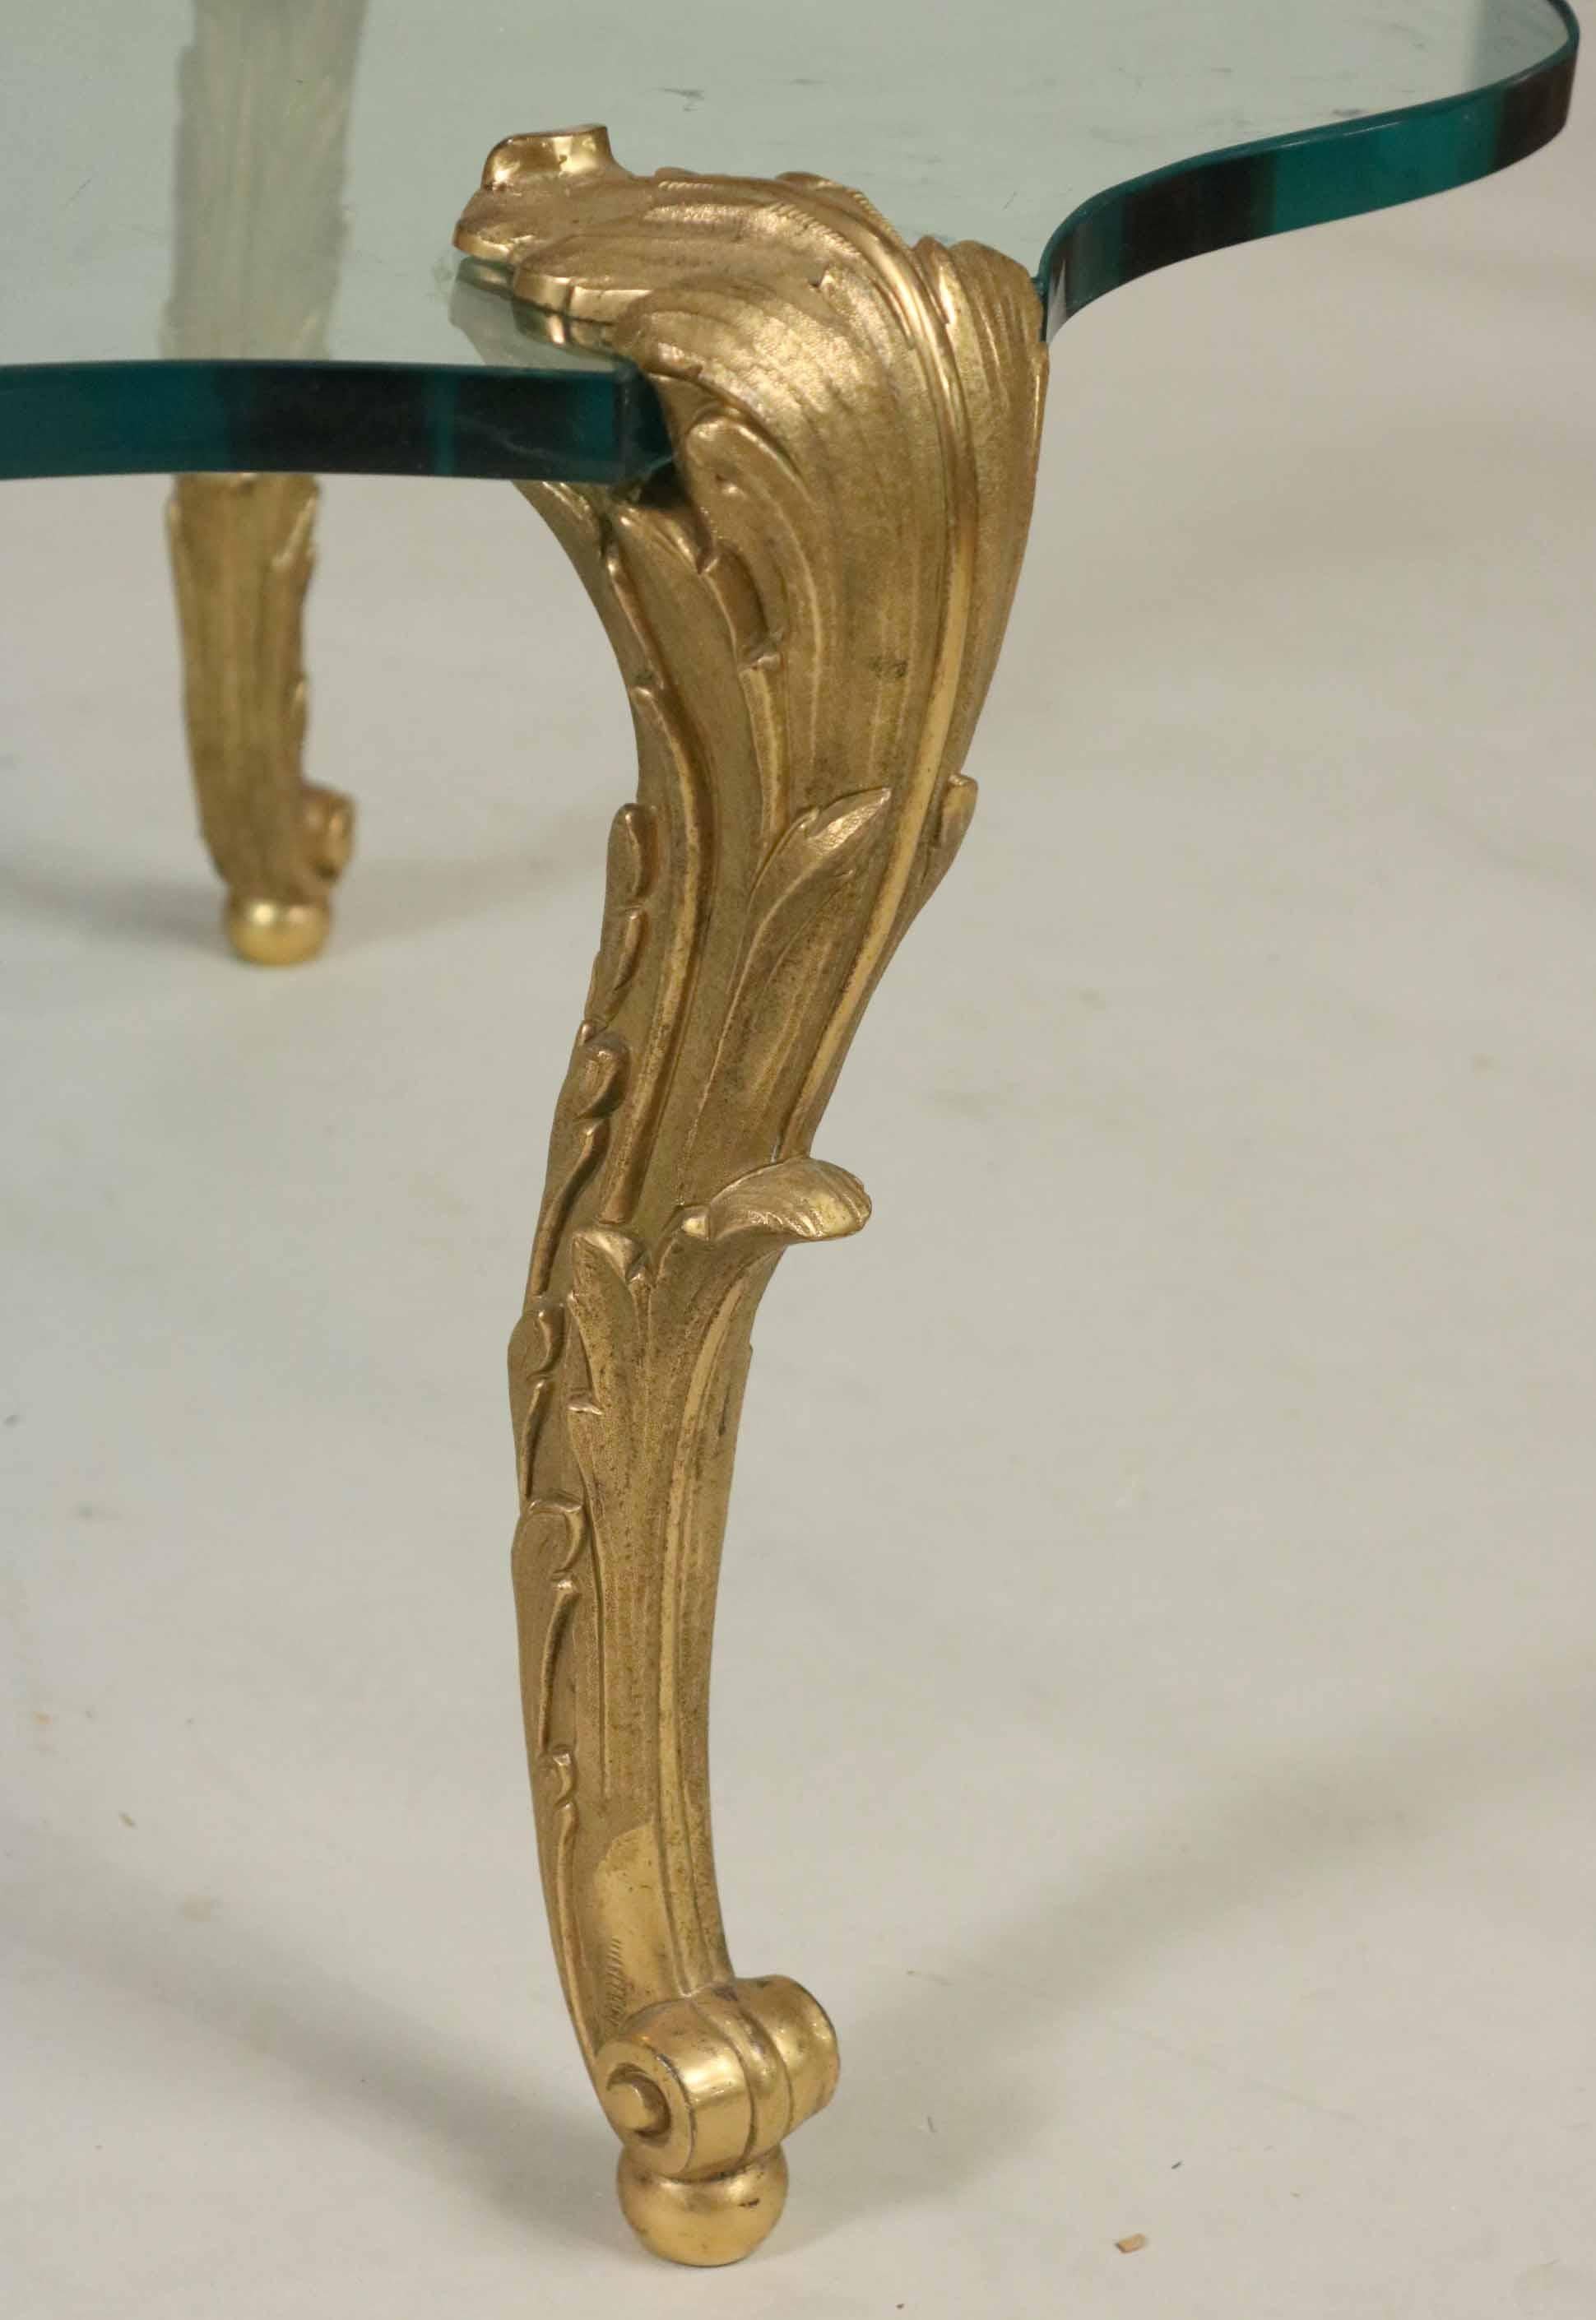 A wonderful P.E. Guerin gilt-bronze & oval glass coffee cocktail cartouche form table,
Marked under each foot, P.E. Guerin Inc, New York,
Measures: 16